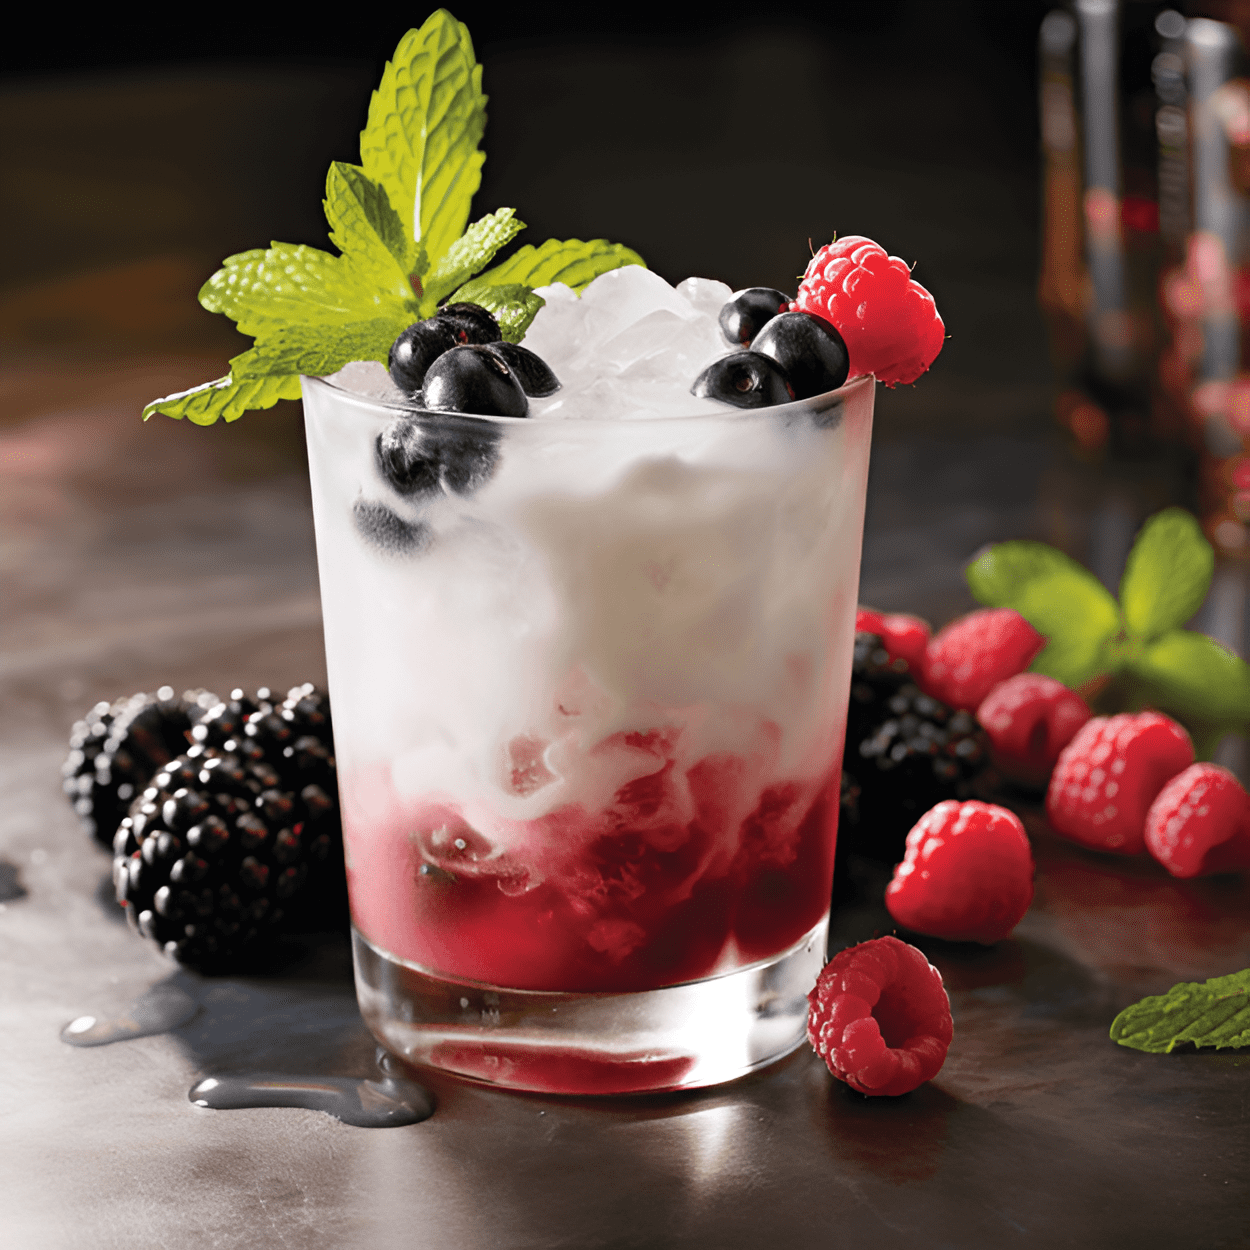 Berry White Russian Cocktail Recipe - The Berry White Russian is a delightful blend of sweet, creamy, and slightly tart. The vodka provides a strong base, the cream gives a velvety smoothness, and the berry infusion adds a sweet-tart kick.